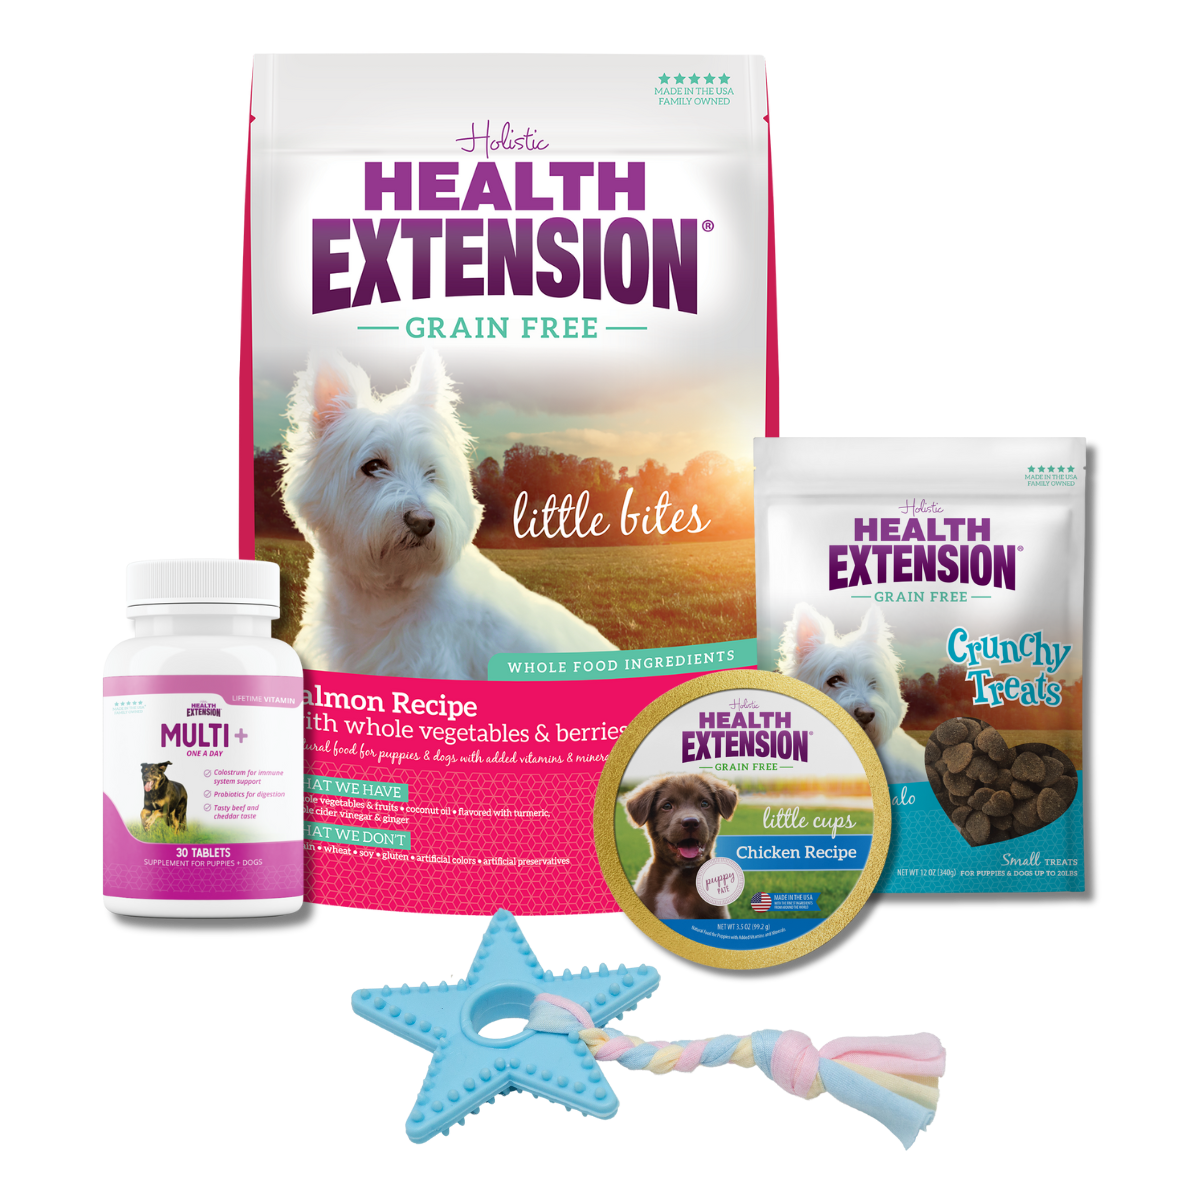 Complete Puppy Bundle: Bag of Health Extension Grain Free Salmon Little Bites and variety of other dog products, including food, treats, toys, and supplements.